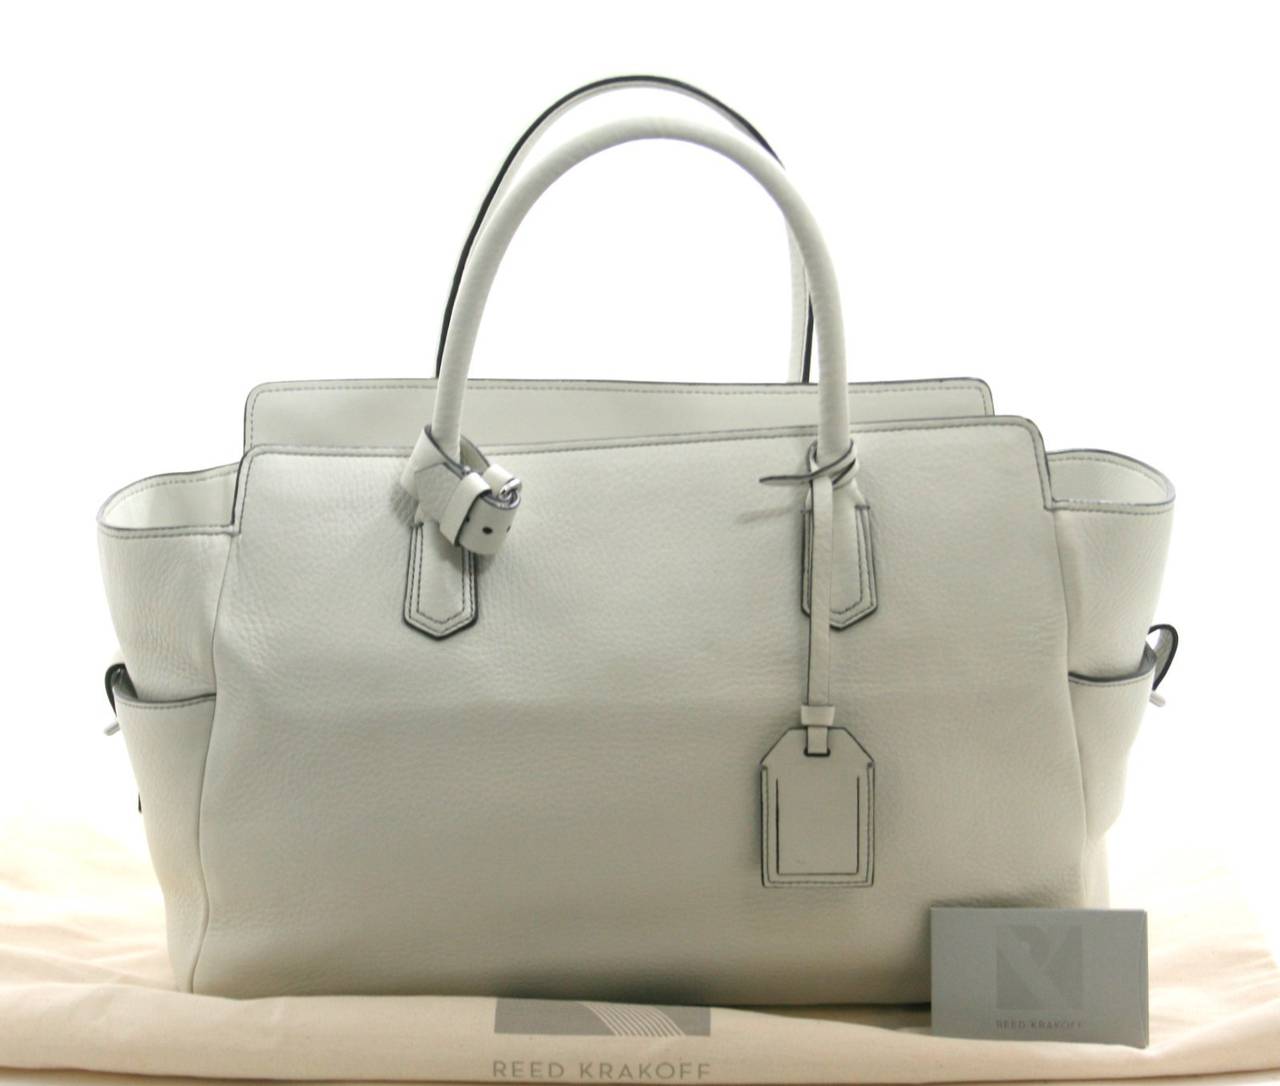 Reed Krakoff’s Chalk White Pebbled Leather Tote is a store return in mint condition.   With no significant sign of wear other than creases from storage, it makes a brilliant find for a savvy shopper.  Retail price $890.00.

Creamy white pebbled